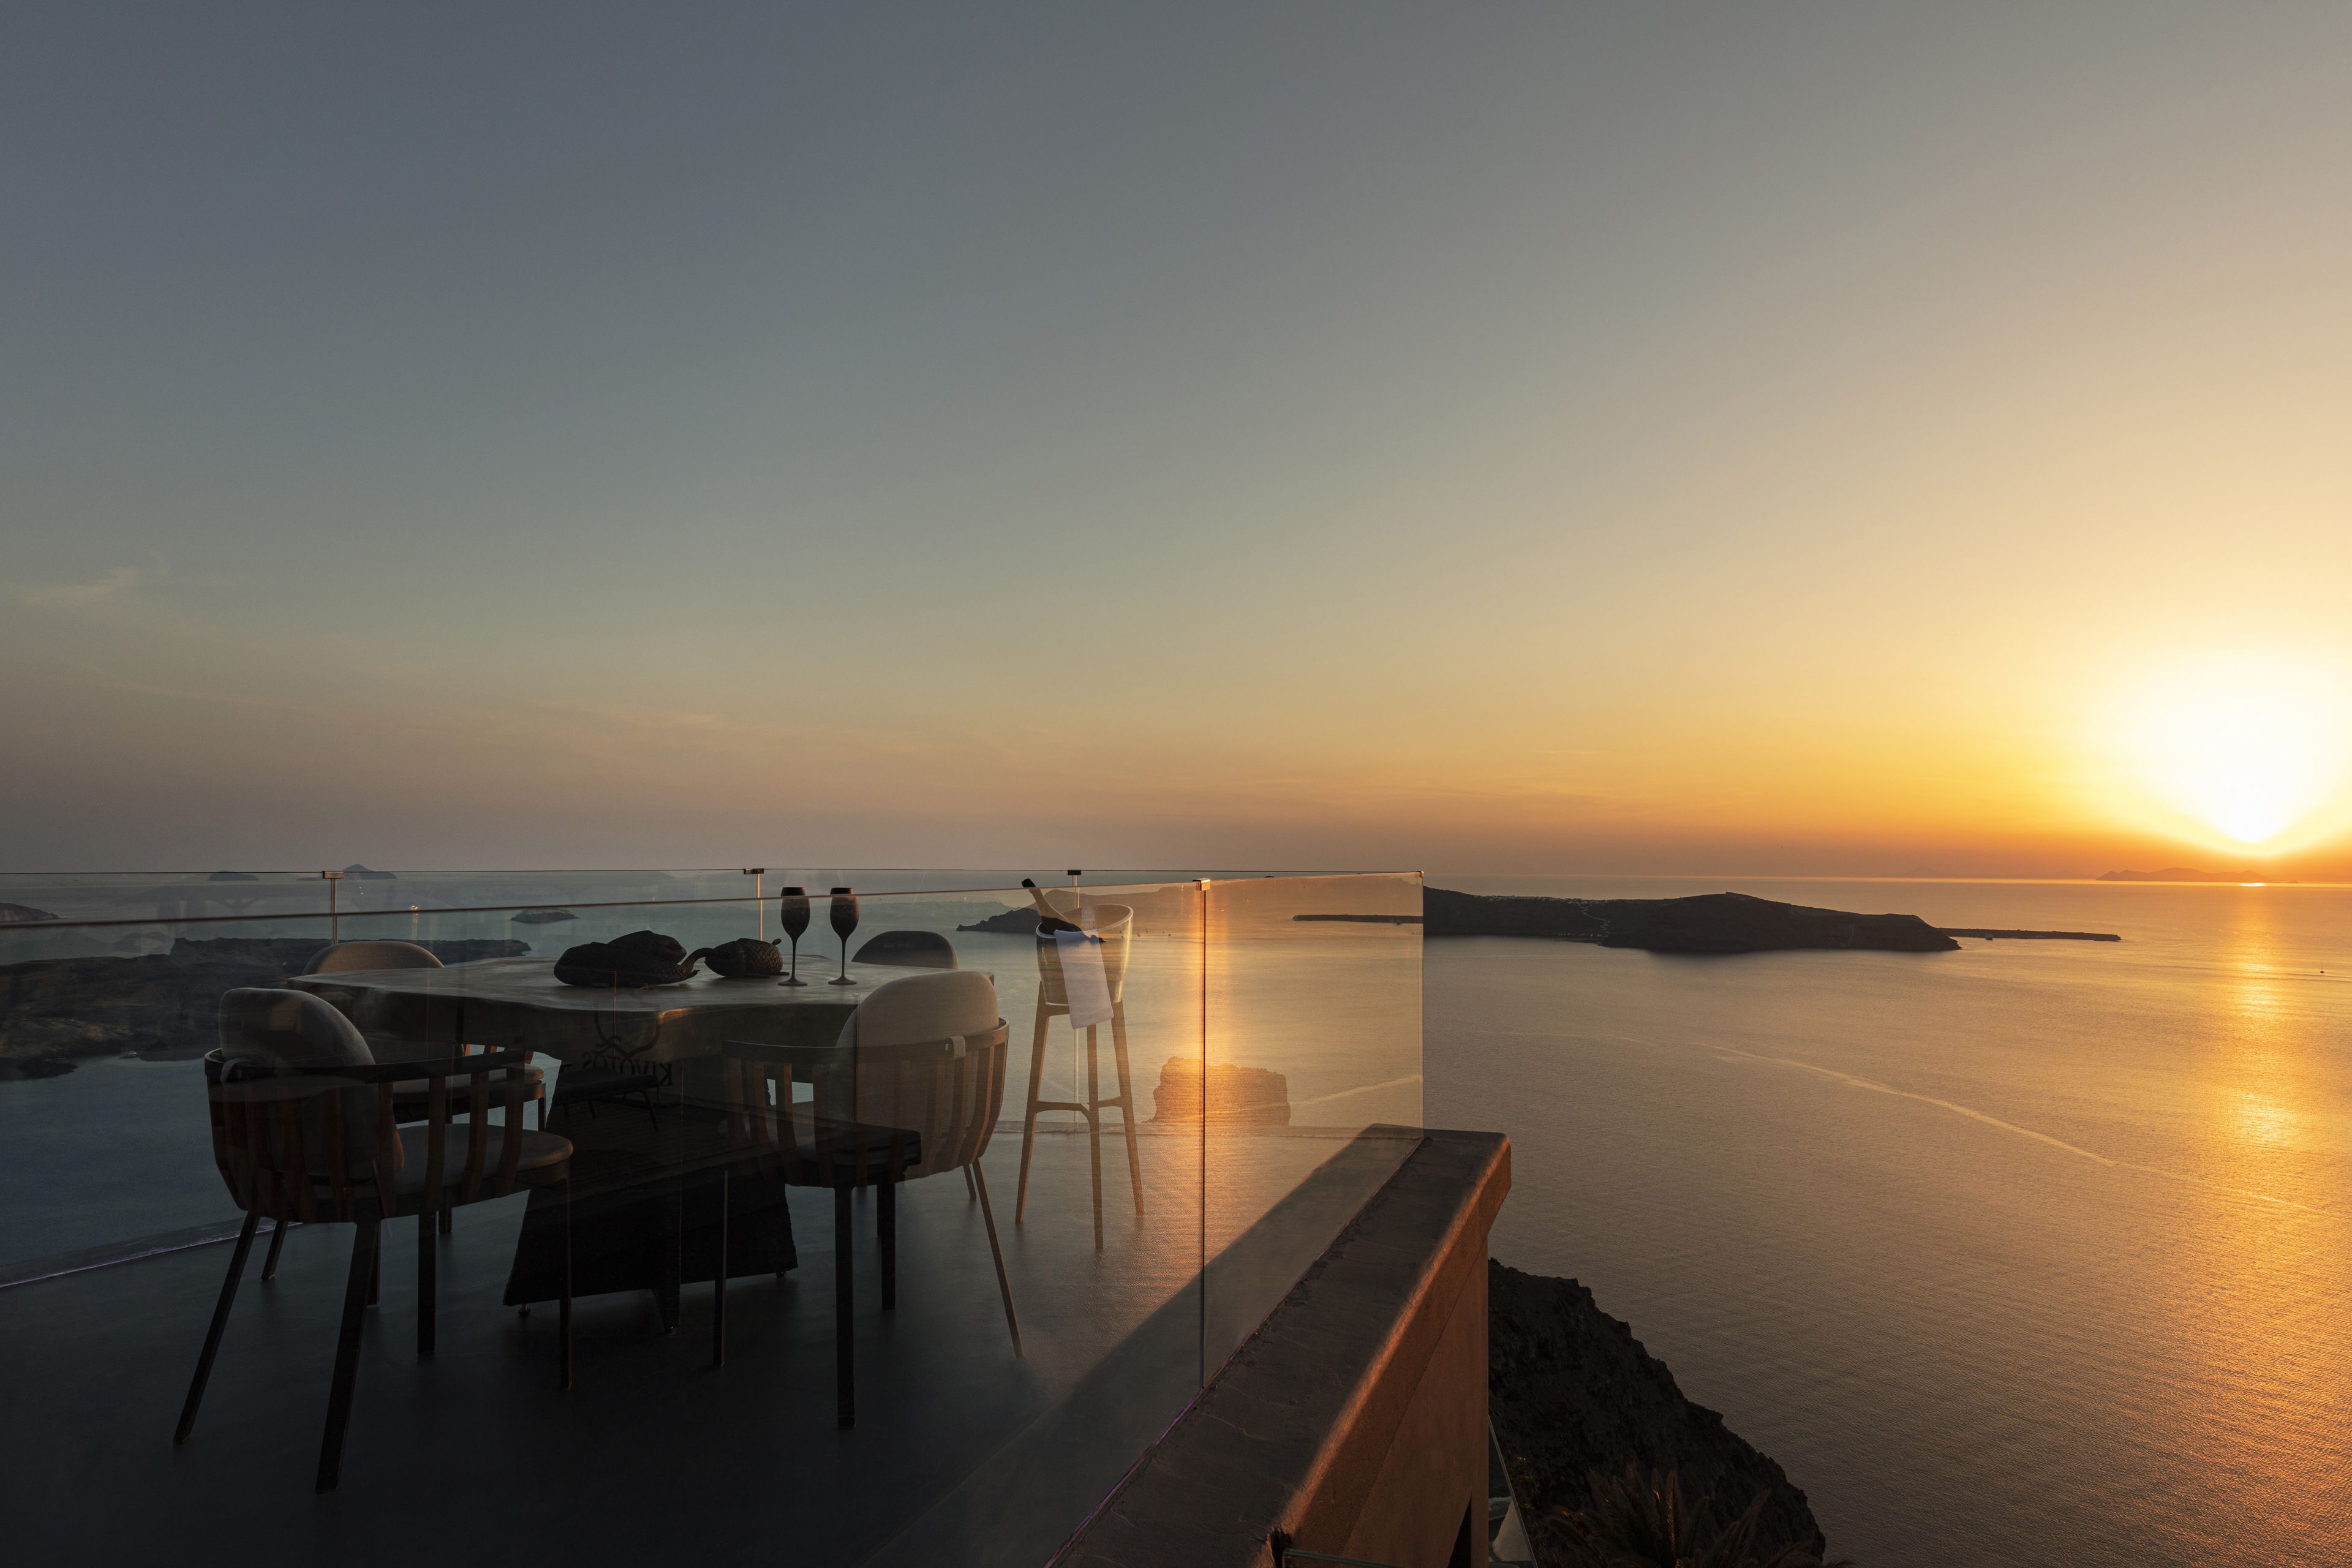 Is this the best place to enjoy the sunset views in Santorini?